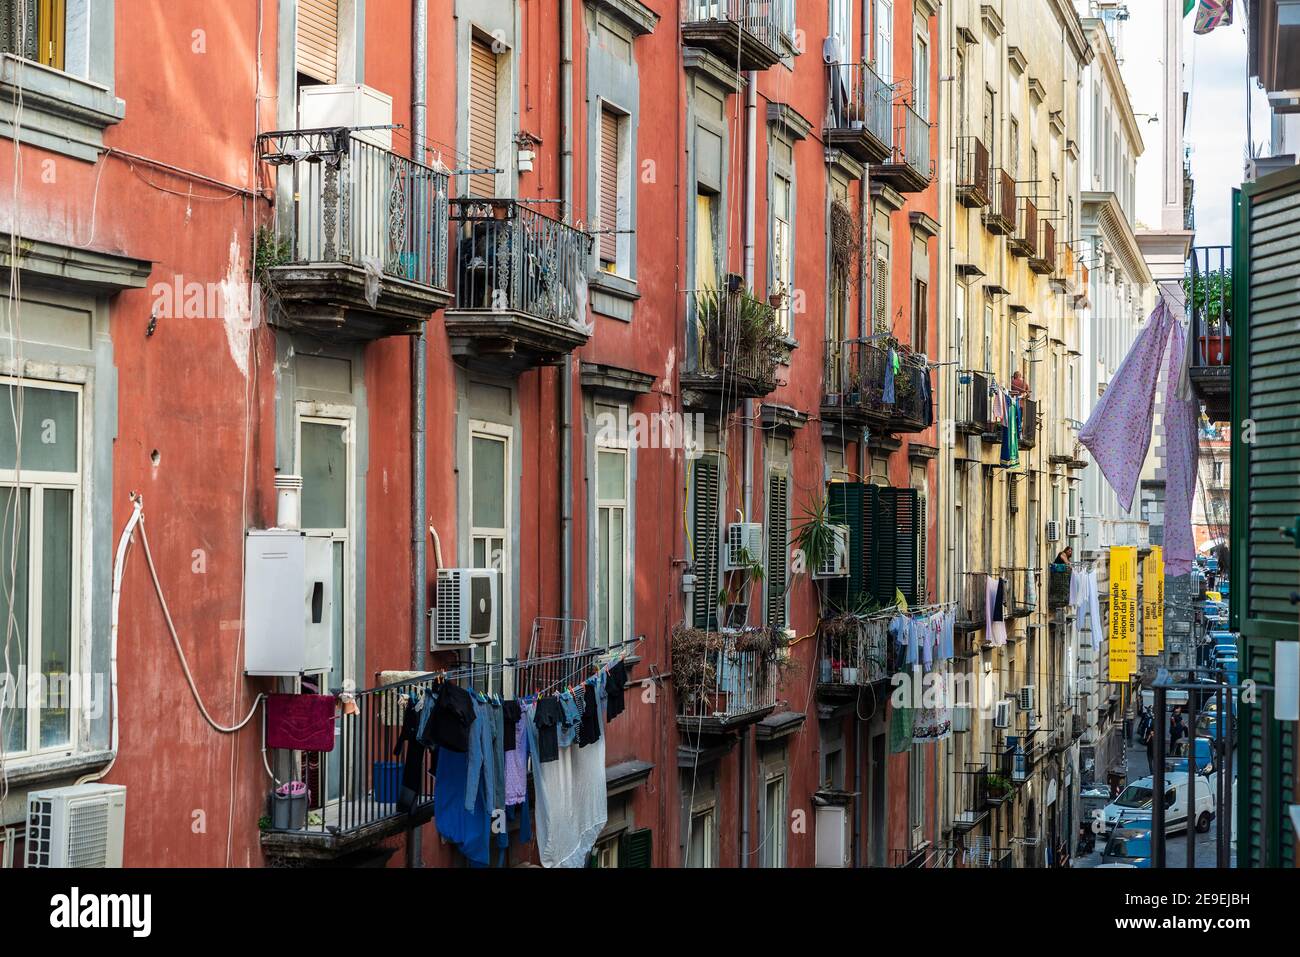 Naples, Italy - September 6, 2019: Facade of classic buildings with hanging clothes and women on the balcony in the historical center of Naples, Italy Stock Photo